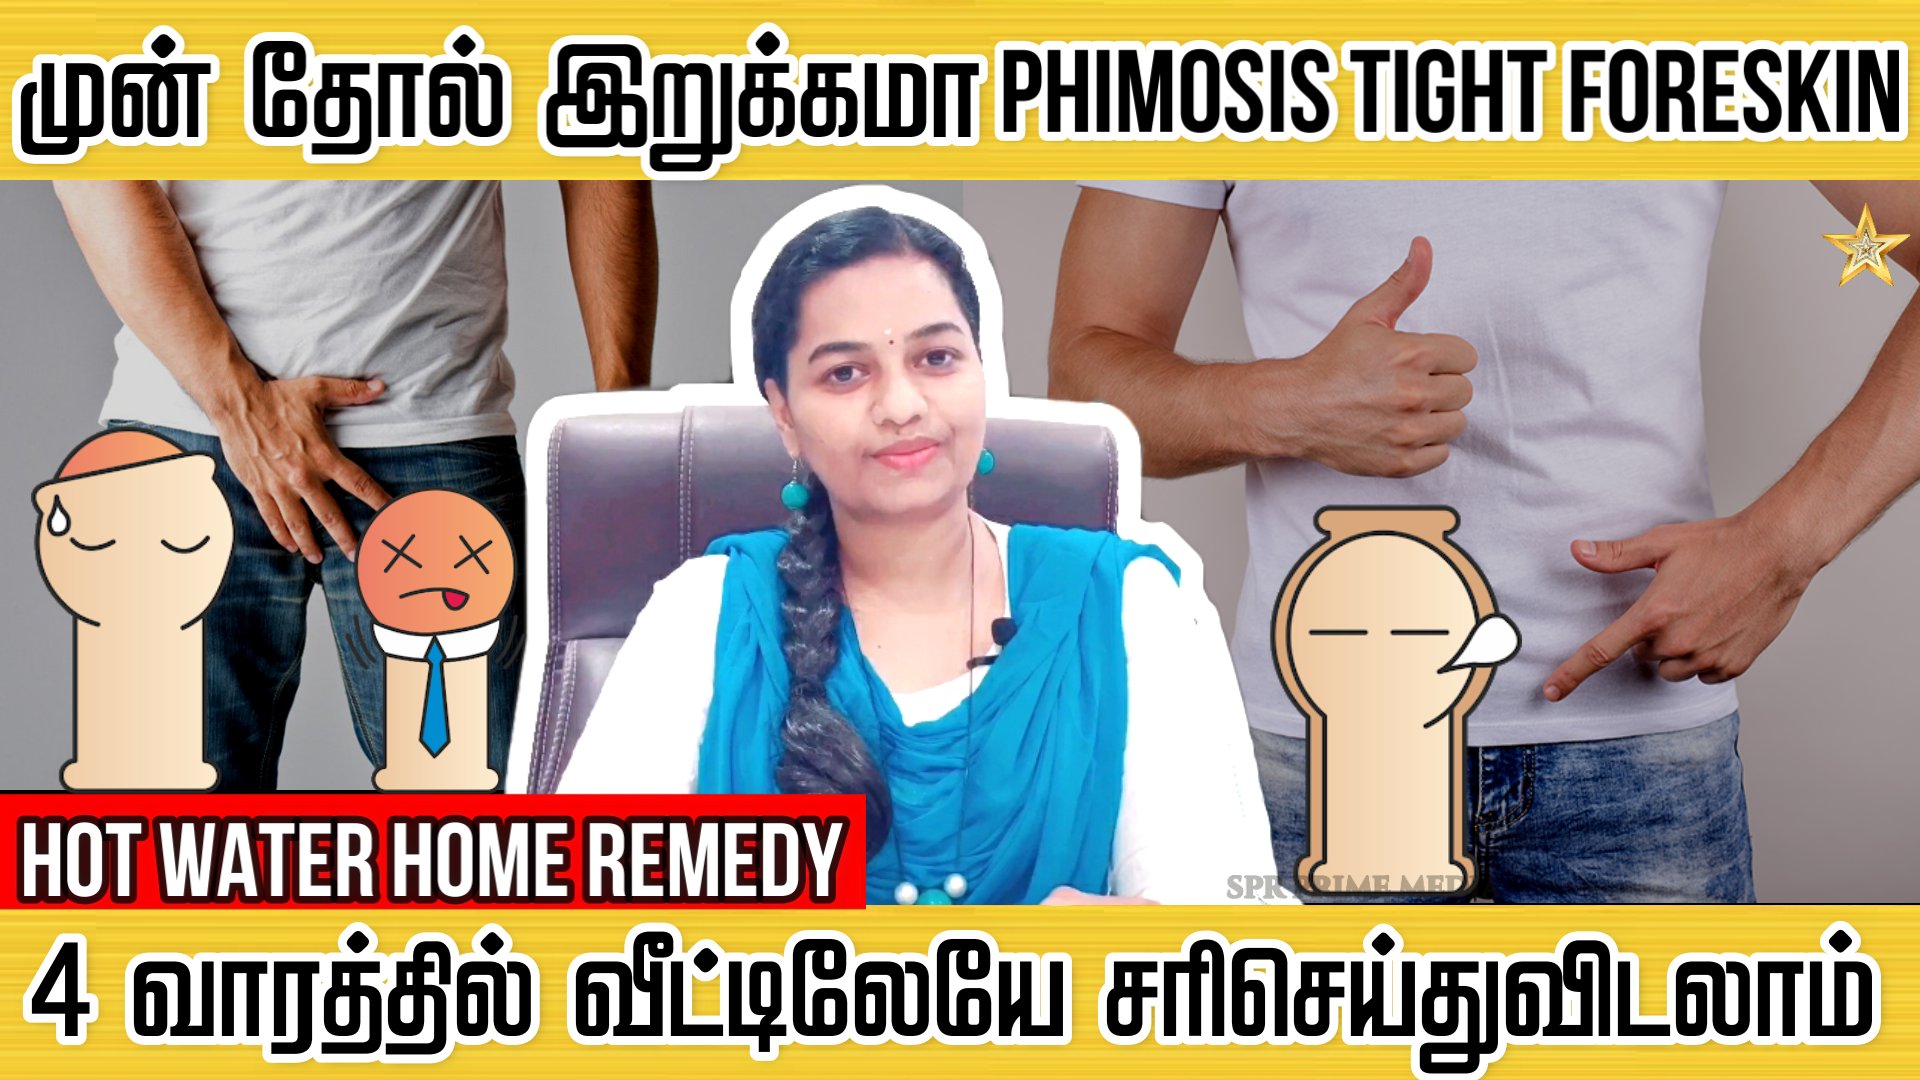 Tight Foreskin Home Solutions - Cure Phimosis at Home